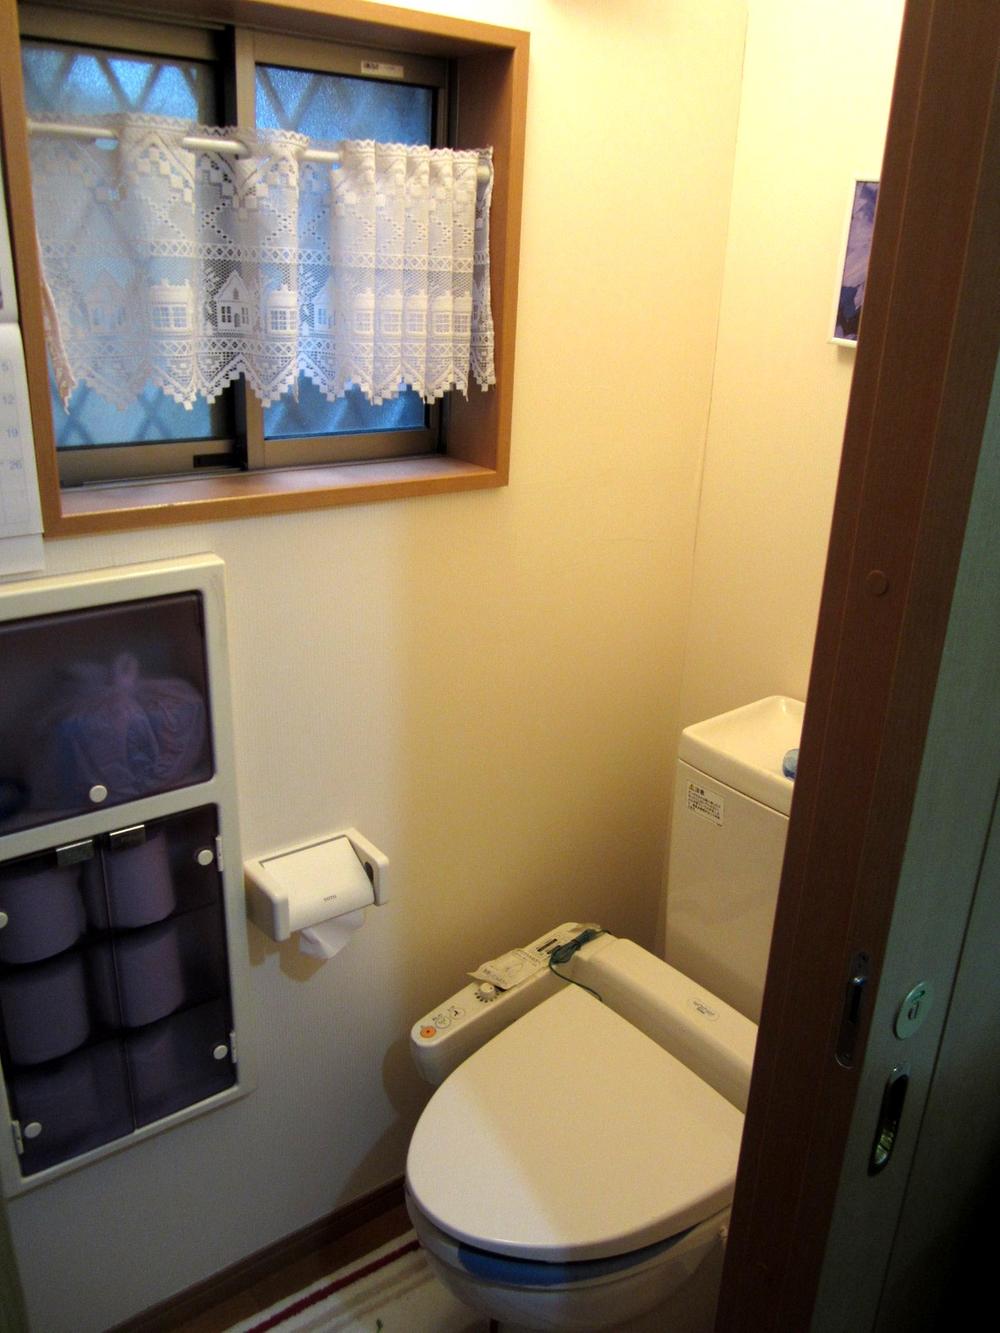 Toilet. There is a window in the toilet Because there is also a storage space shelf, Books and flowers also put space